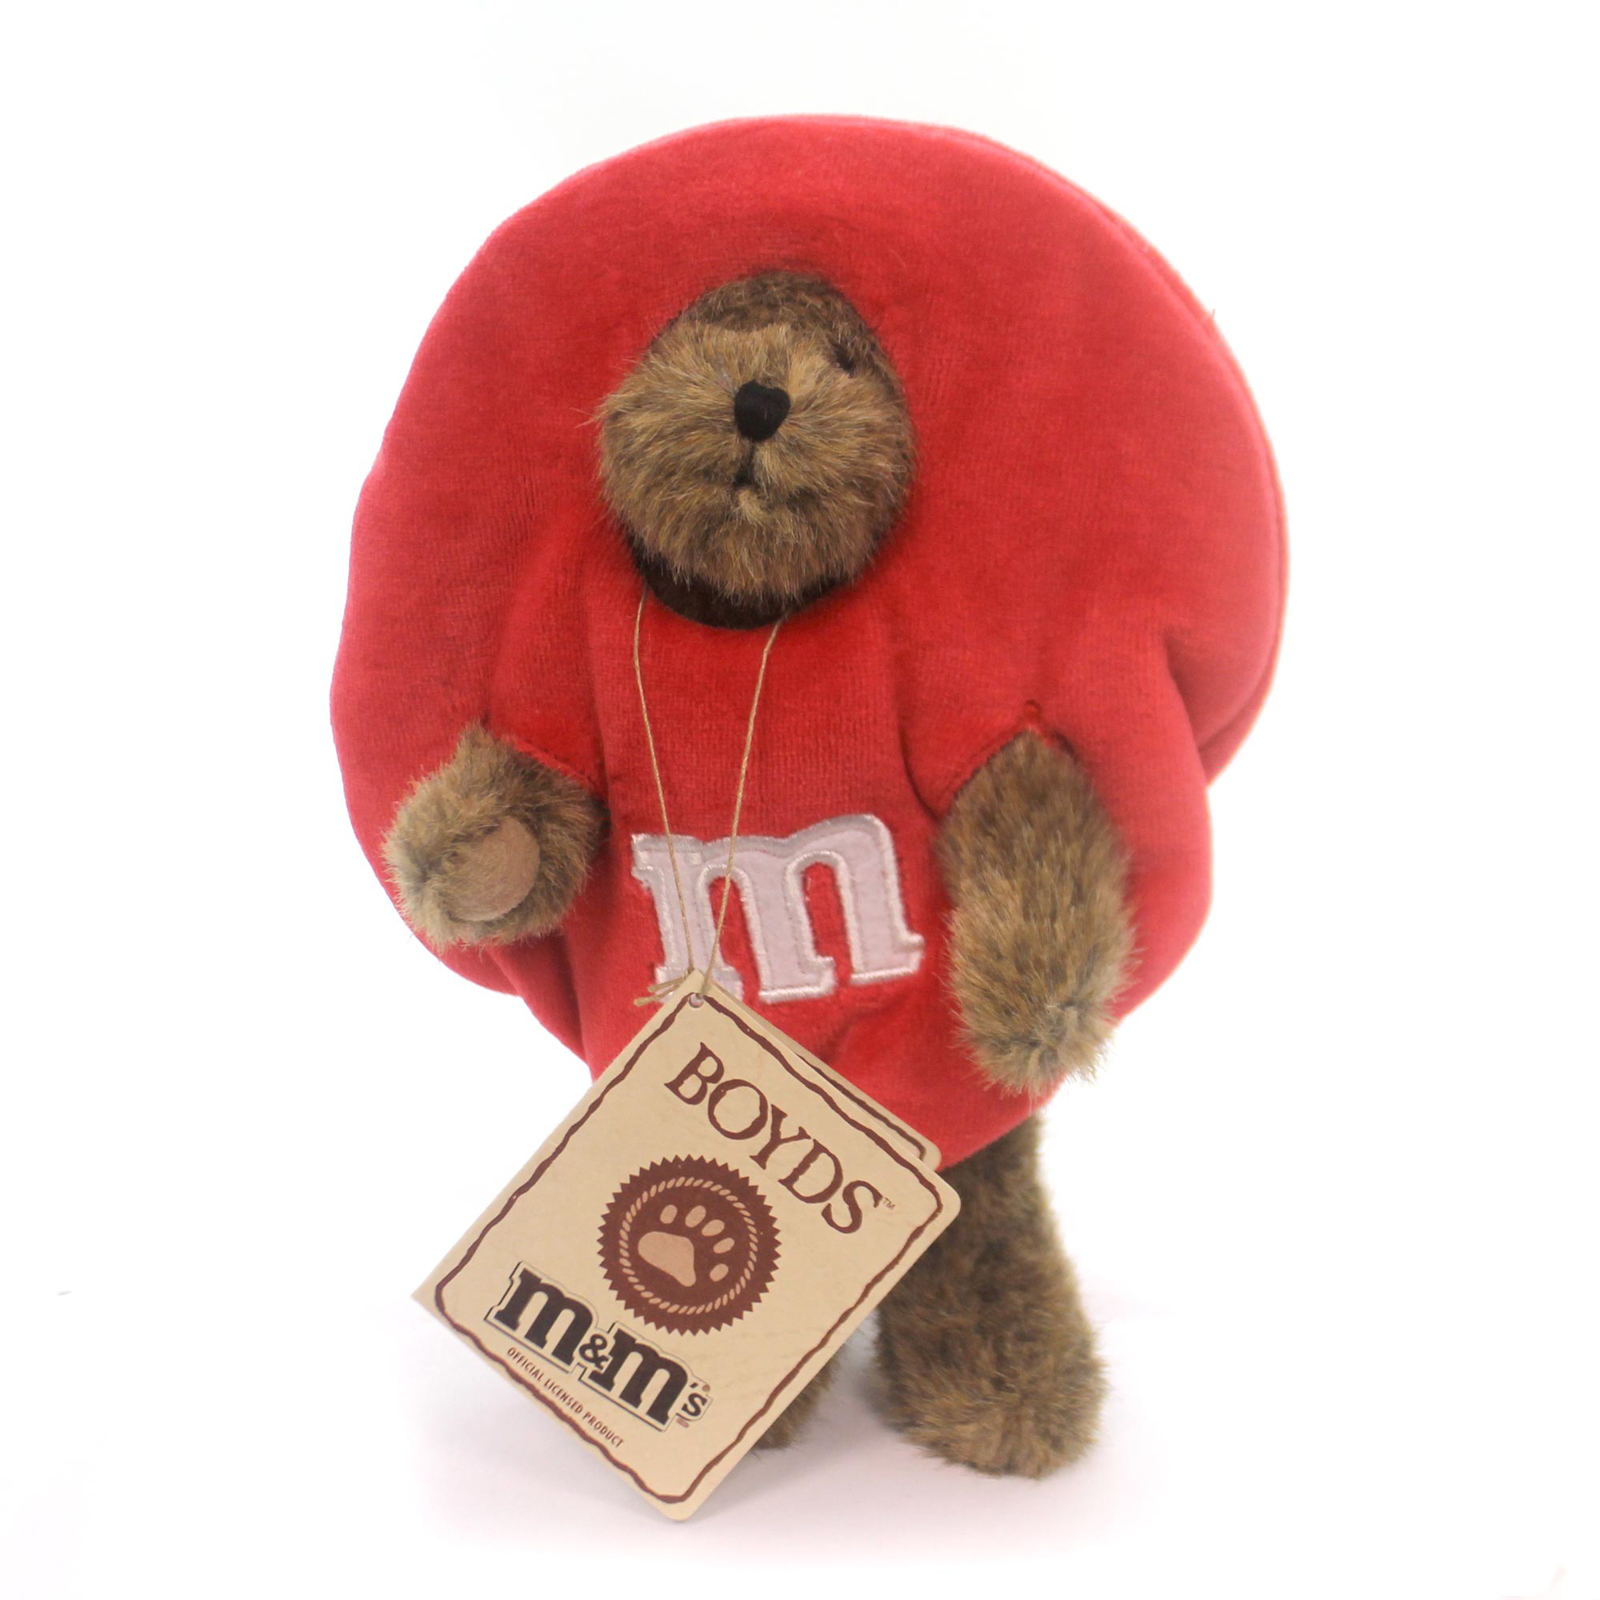 Boyds Candy Peekers Plush Teddy Bears Dressed as M & Ms